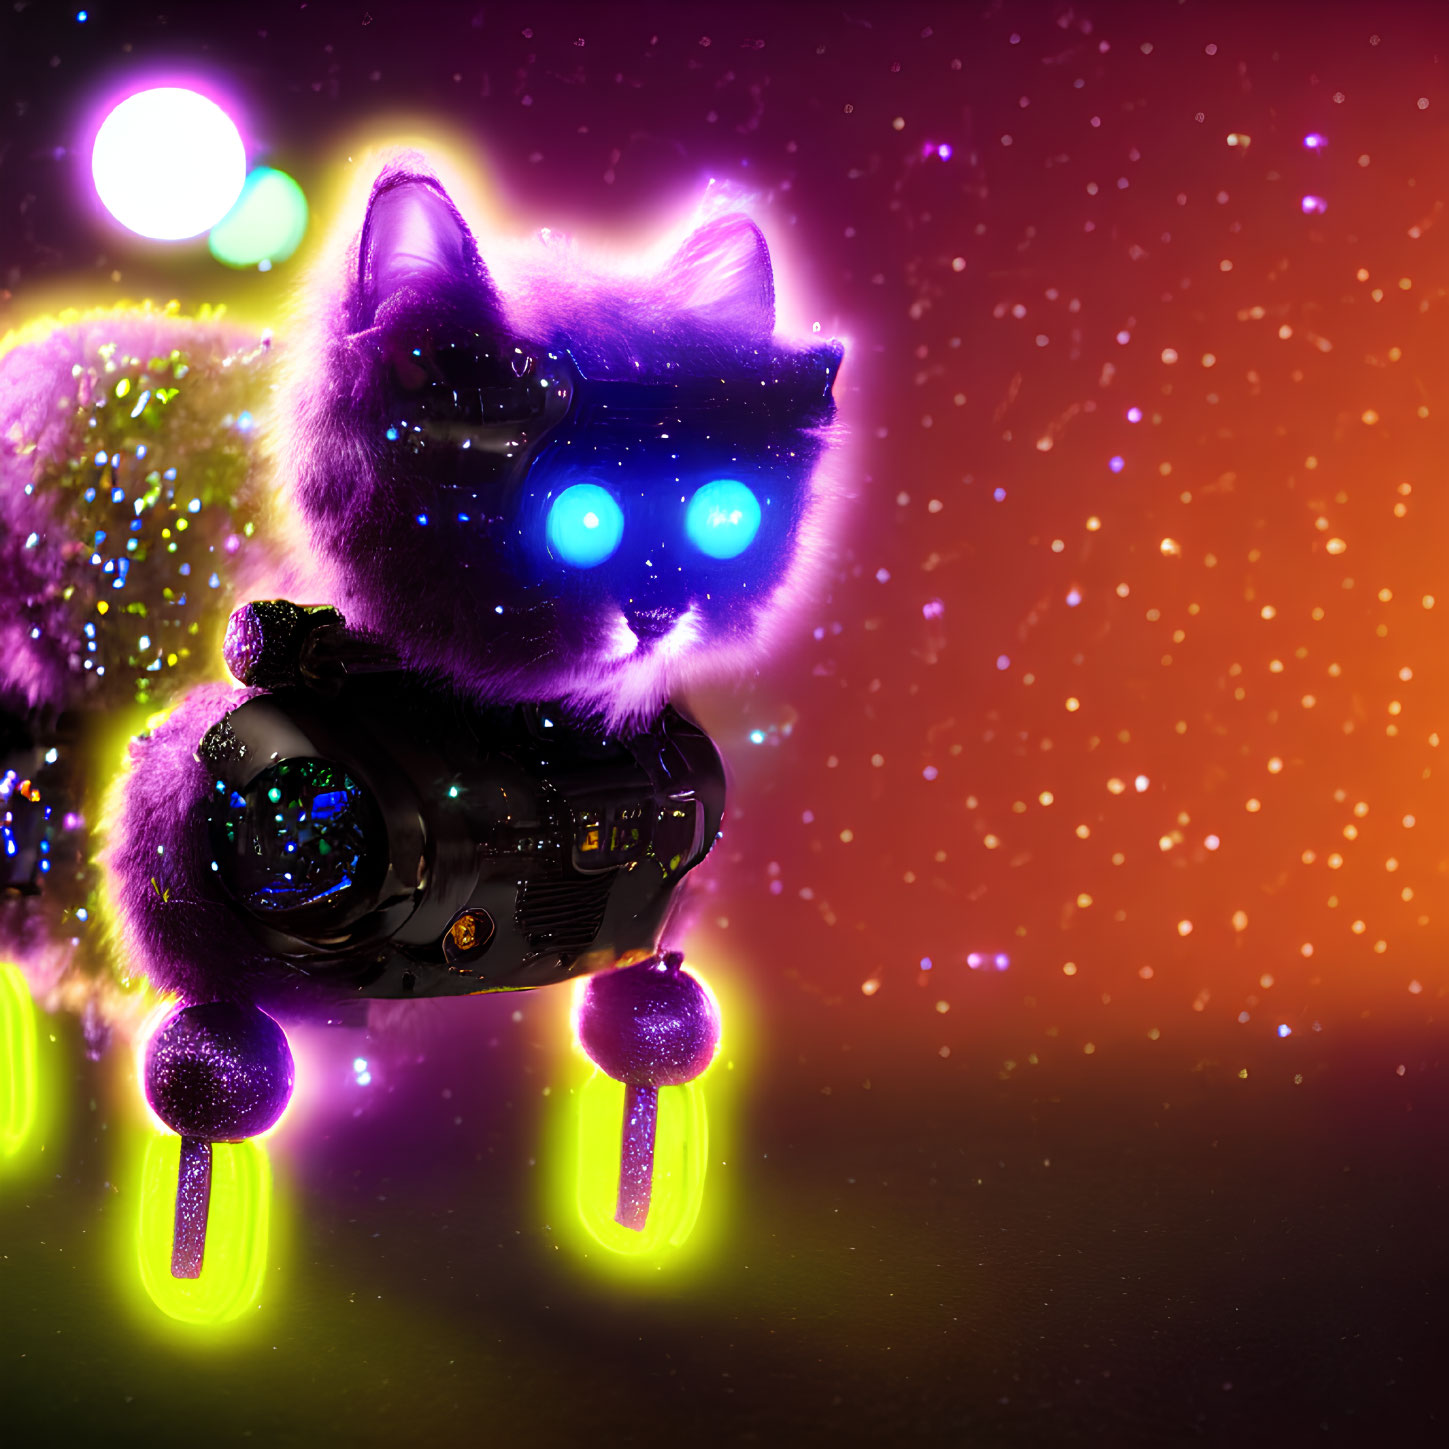 Glowing purple cosmic cat with blue eyes in space with camera and green orbs